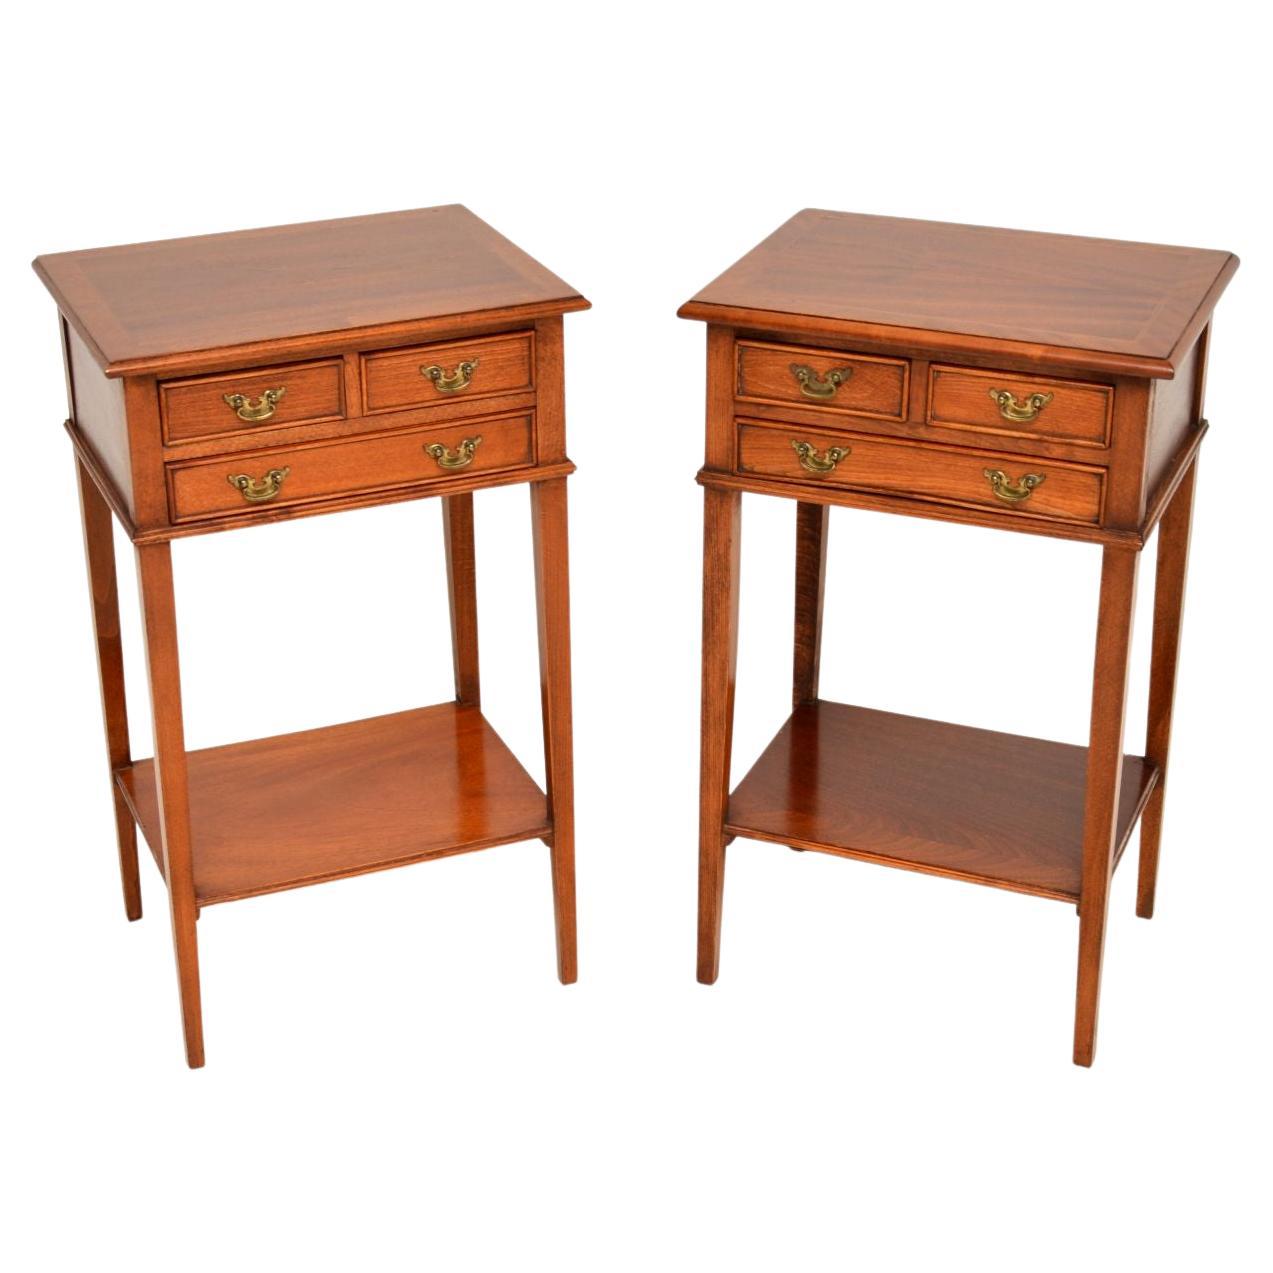 Pair of Antique Georgian Style Side Tables